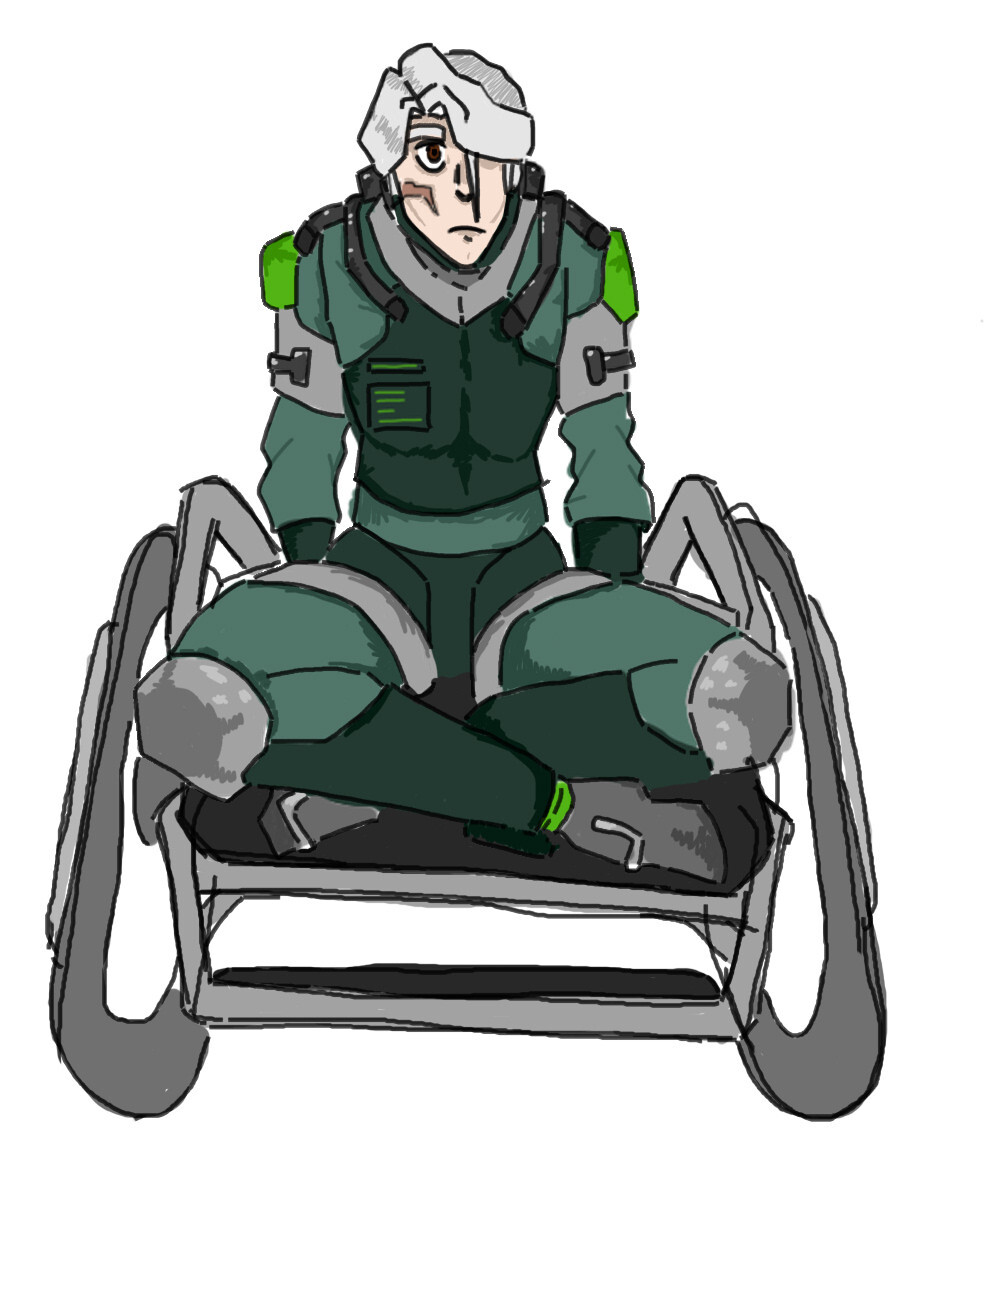 Sylvie, an androgynous mech pilot, scowls at the viewer. They are sat cross-legged in a manual wheelchair, and are wearing a green hardsuit.